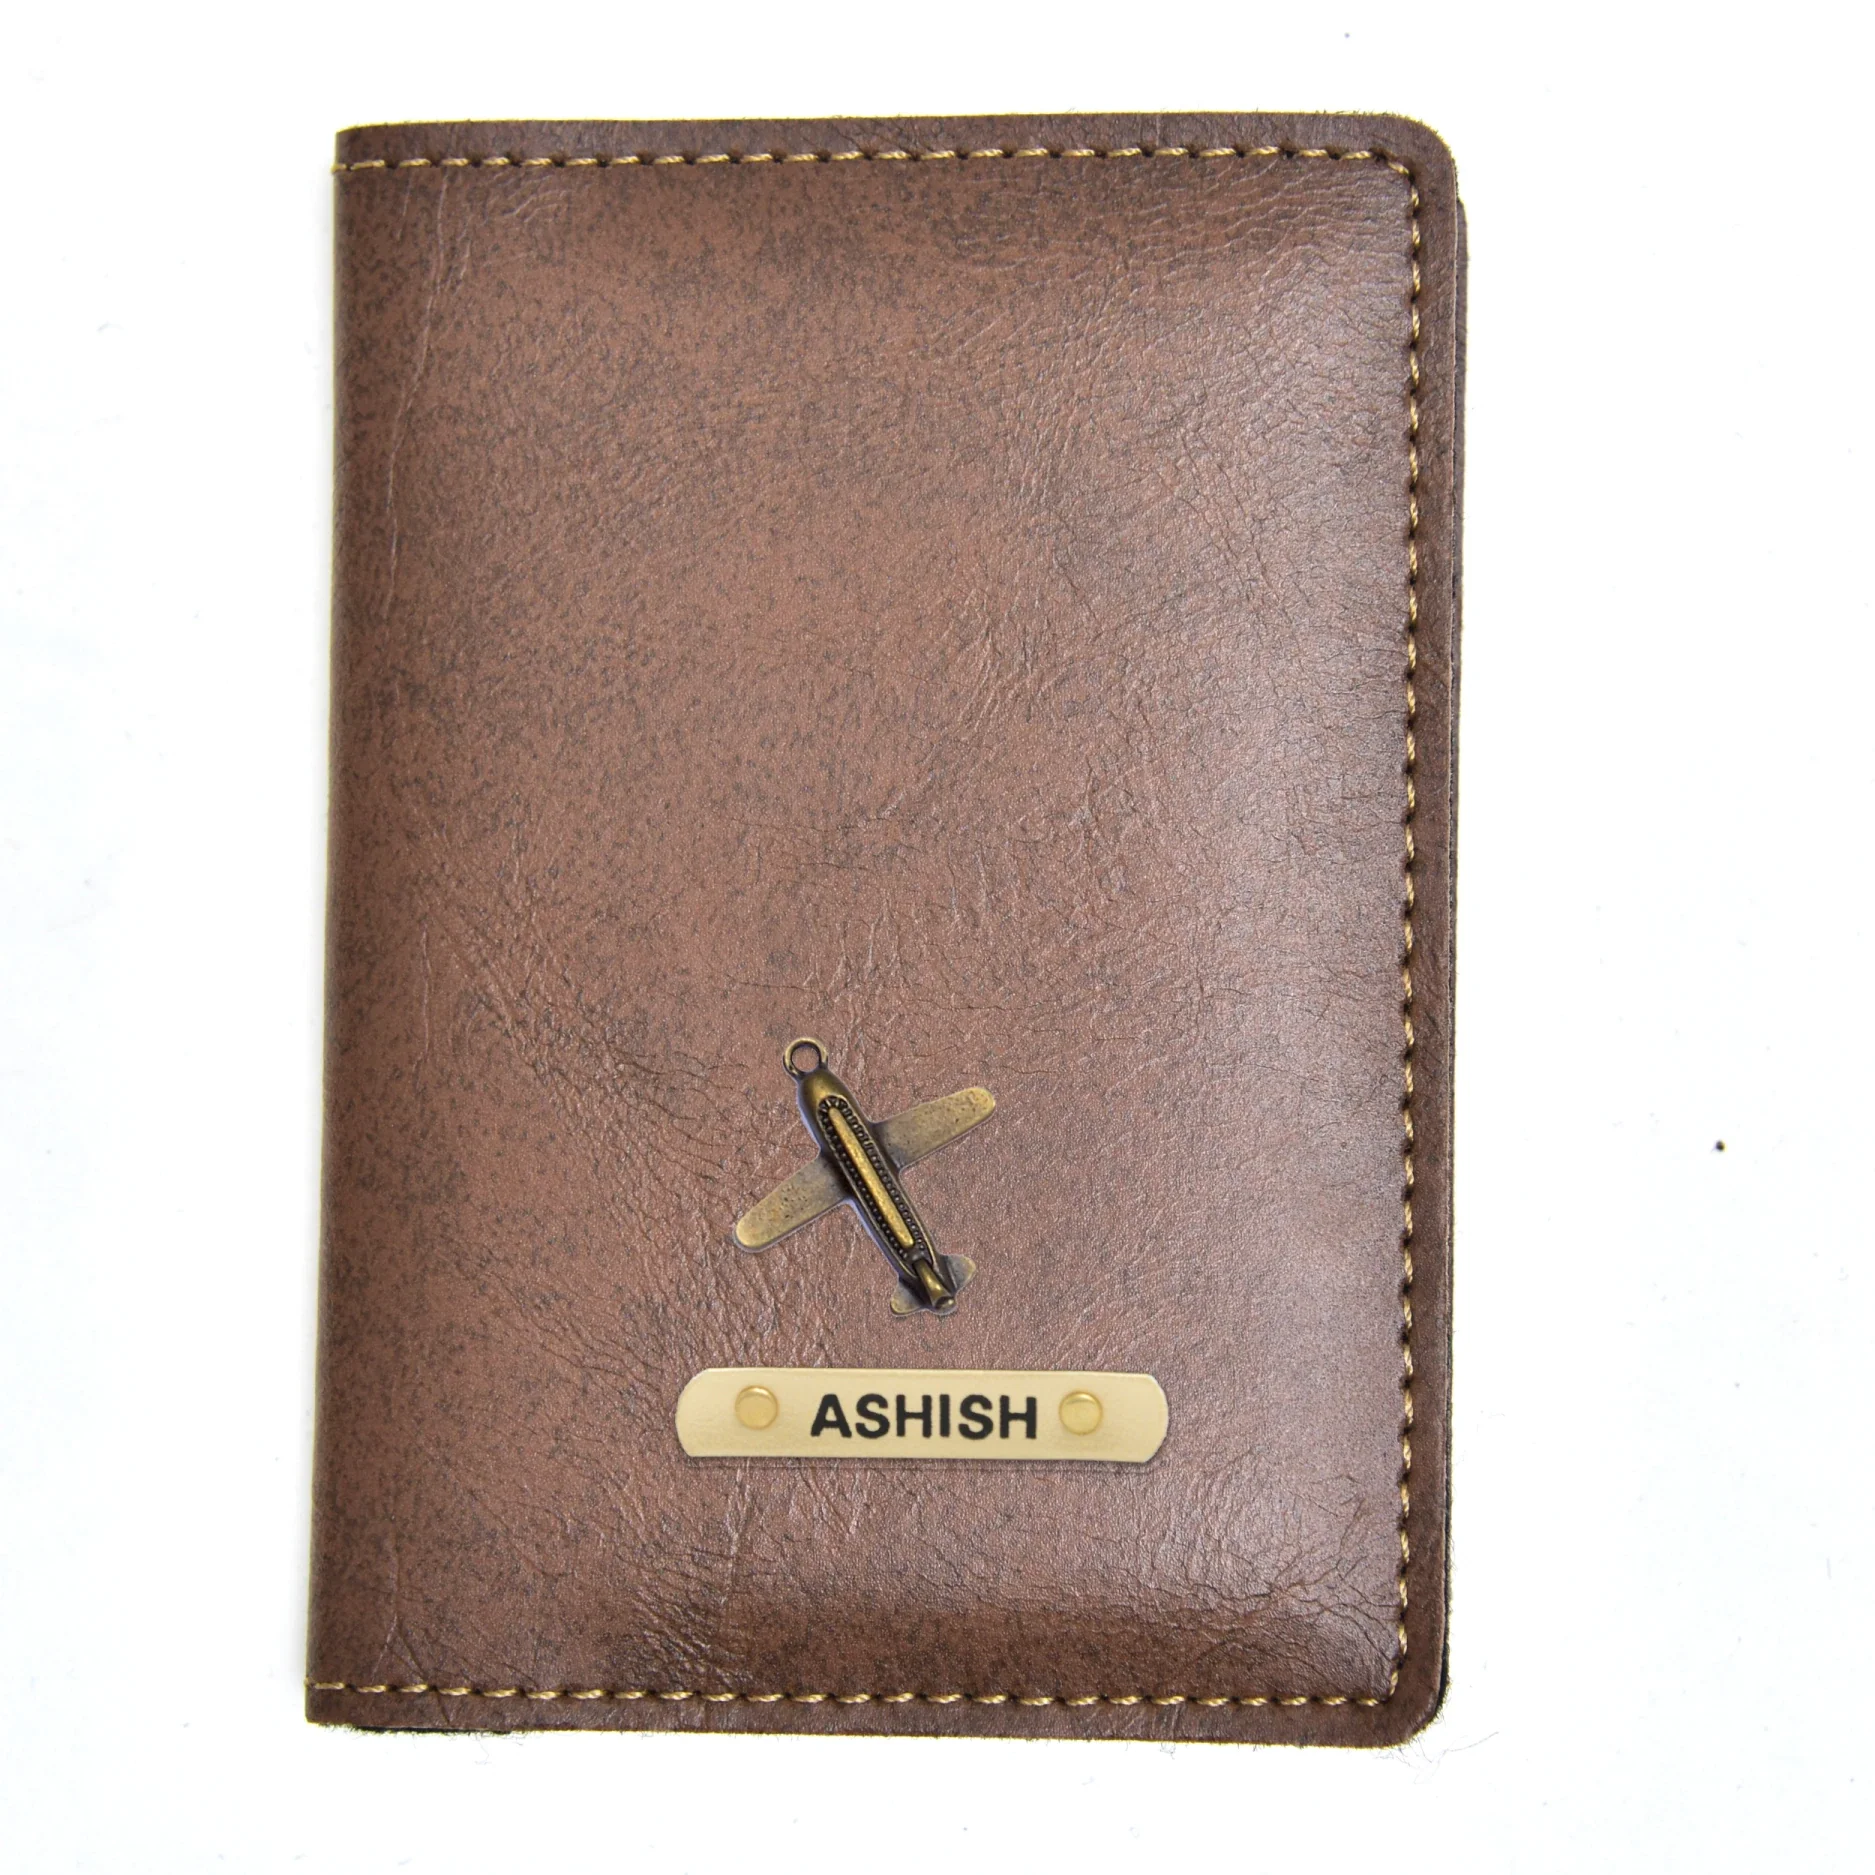 Protect your travel document in the utmost style with a classy leather passport case tailored to your preferences.